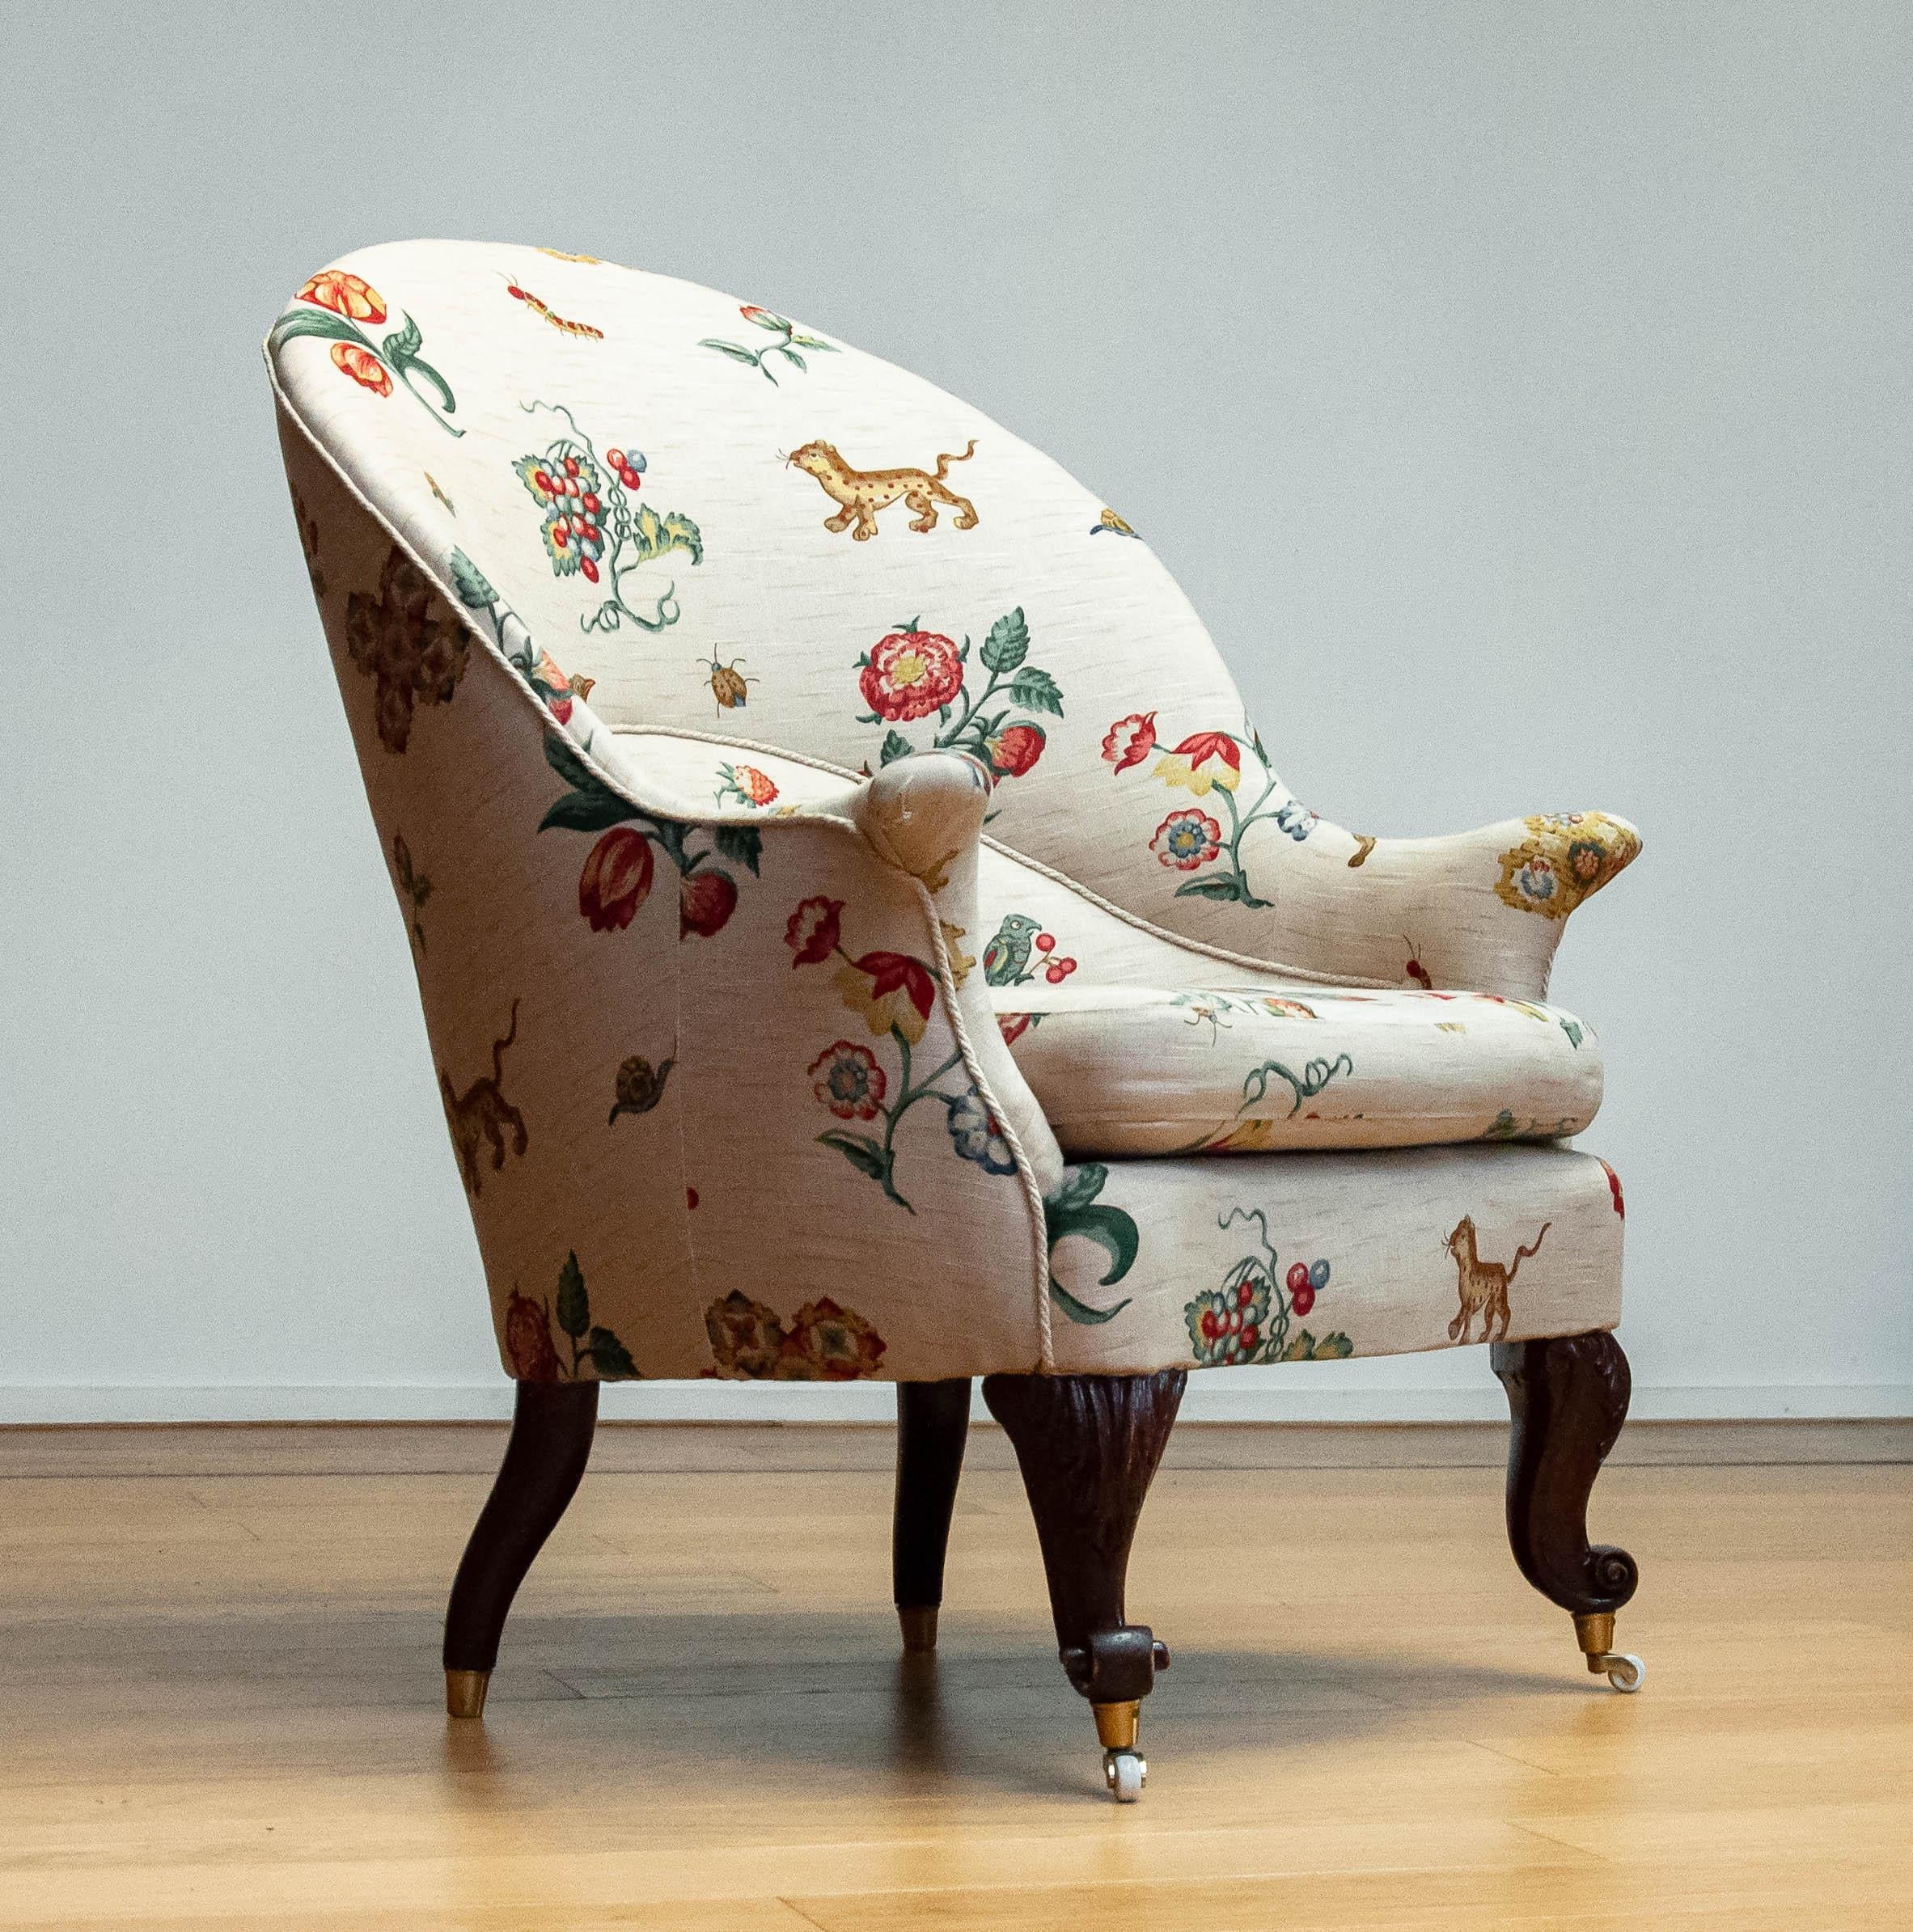 19th Century Swedish Armchair With Linen Flora And Fauna Fantasy Print Fabric In Good Condition For Sale In Silvolde, Gelderland